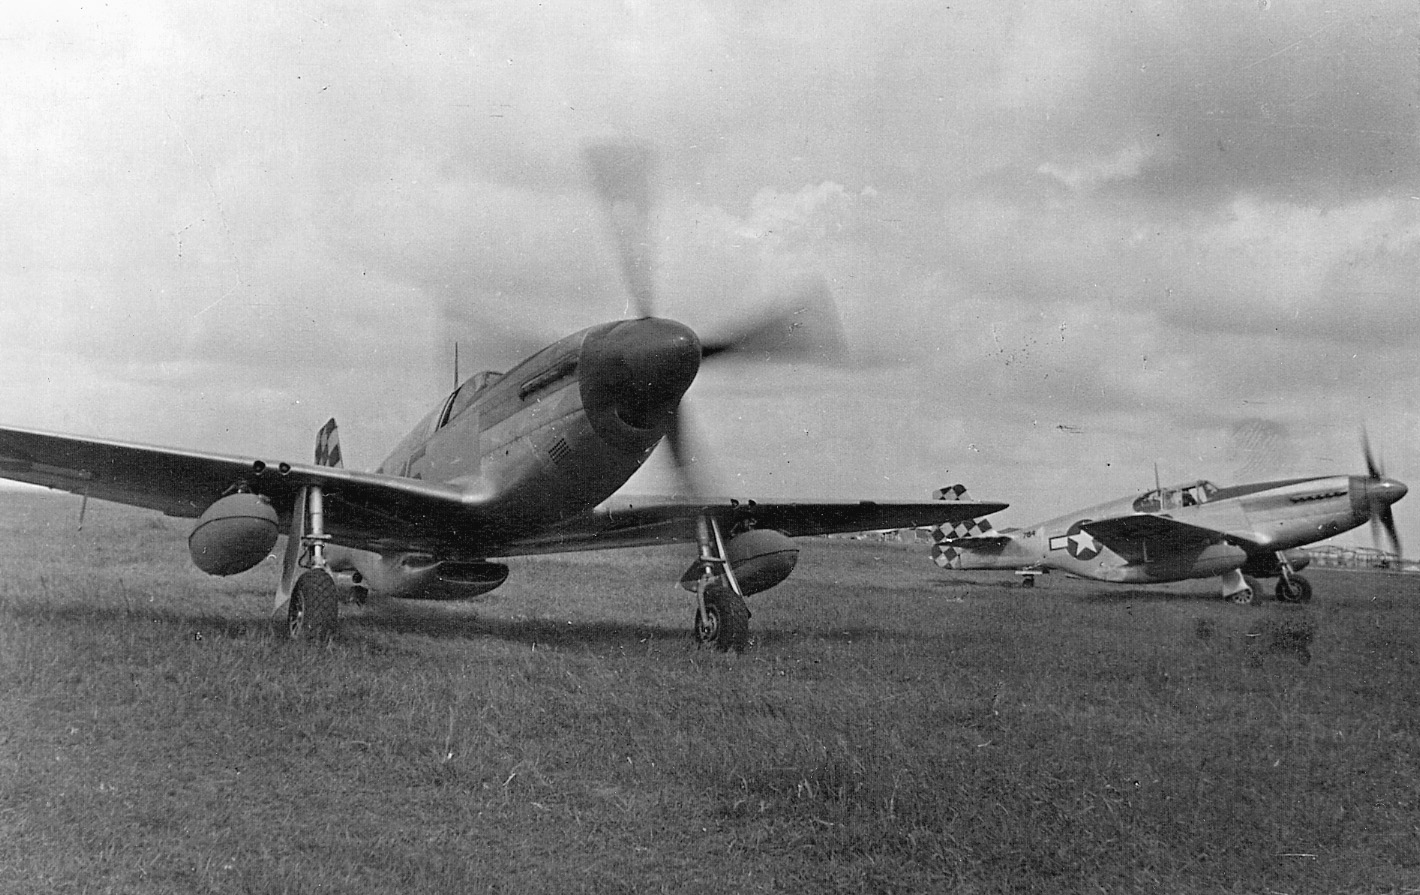 P-51’s from the 325th Fighter Group preparing for take-off before a mission over Romania.